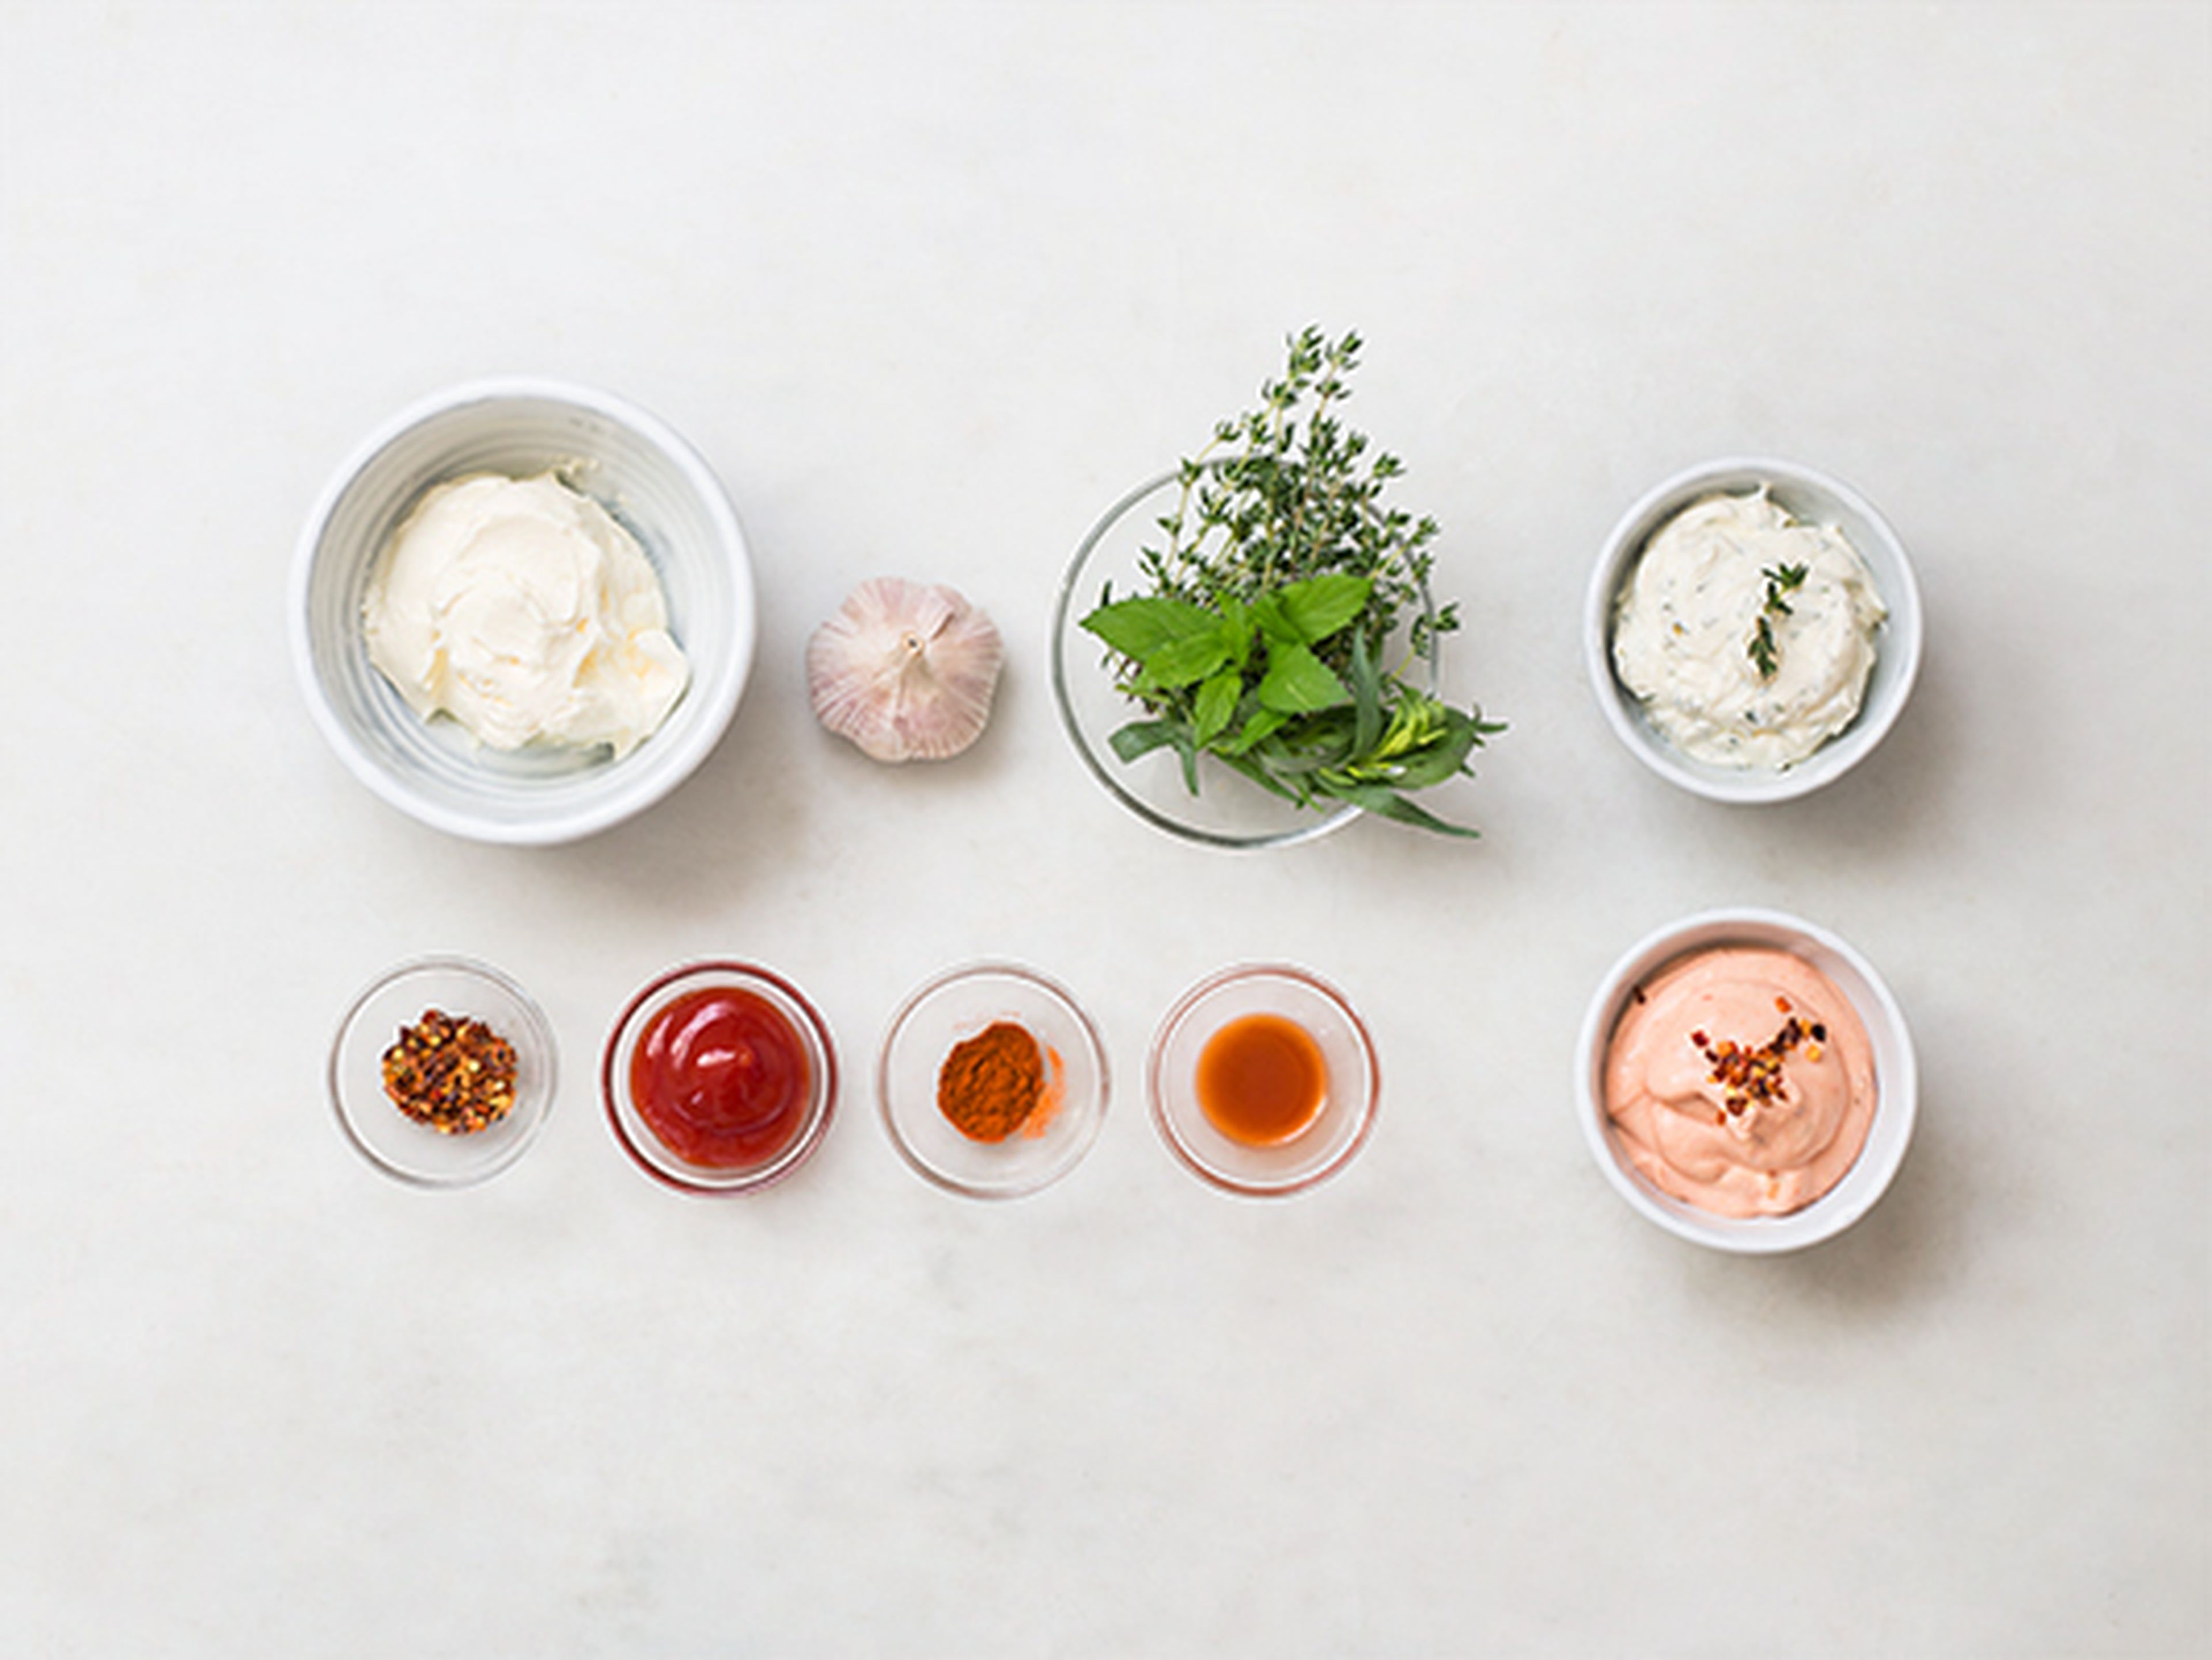 How to prepare yogurt dipping sauces